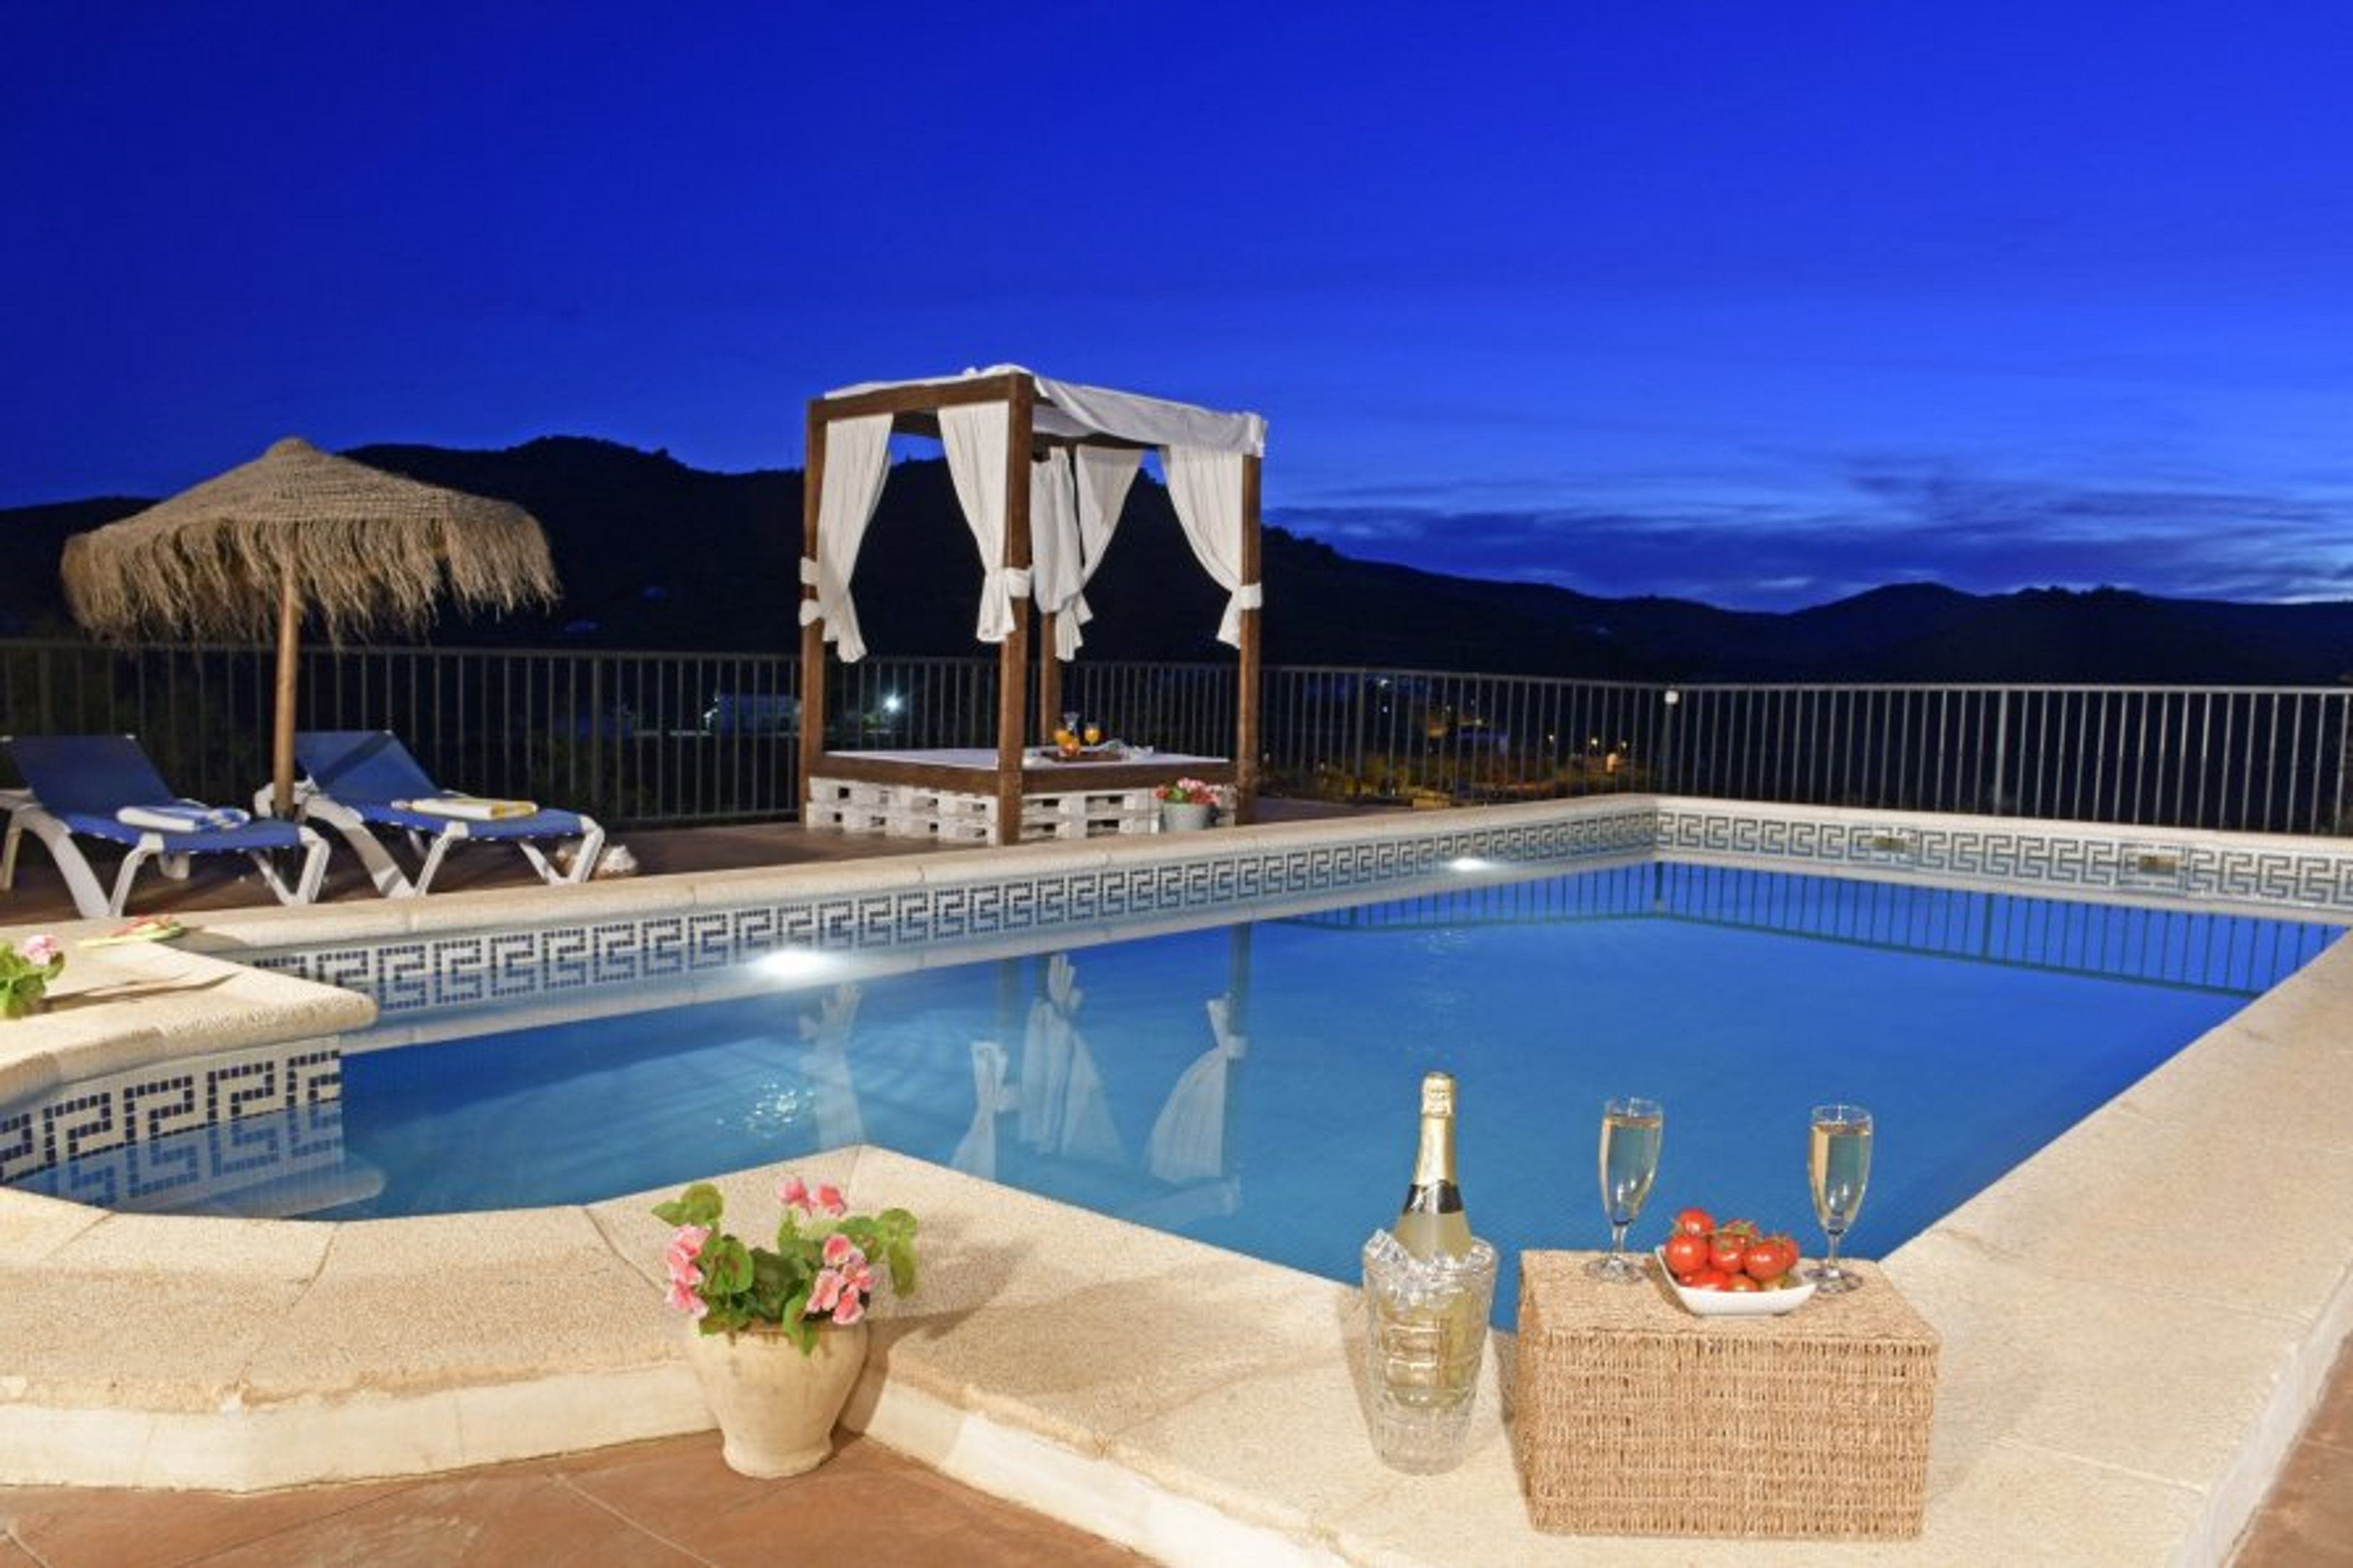 The stunning villa at night, with private pool and amazing views!